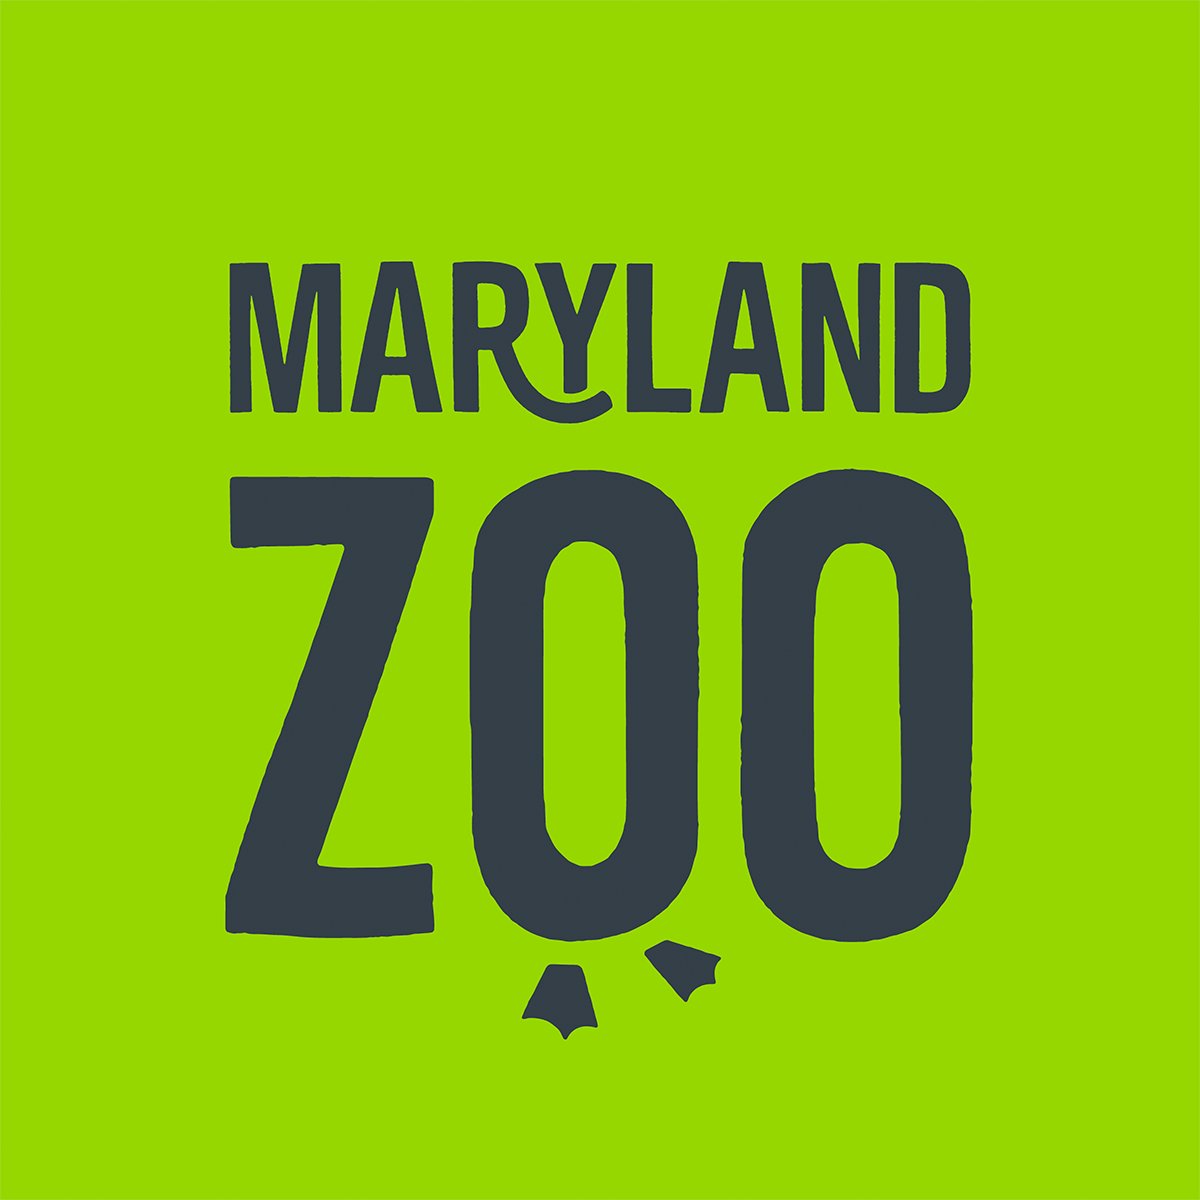 Learning with wildlife. The Maryland Zoo's educators engage students, teachers and adults with living science to inspire animal conservation. #allforanimals